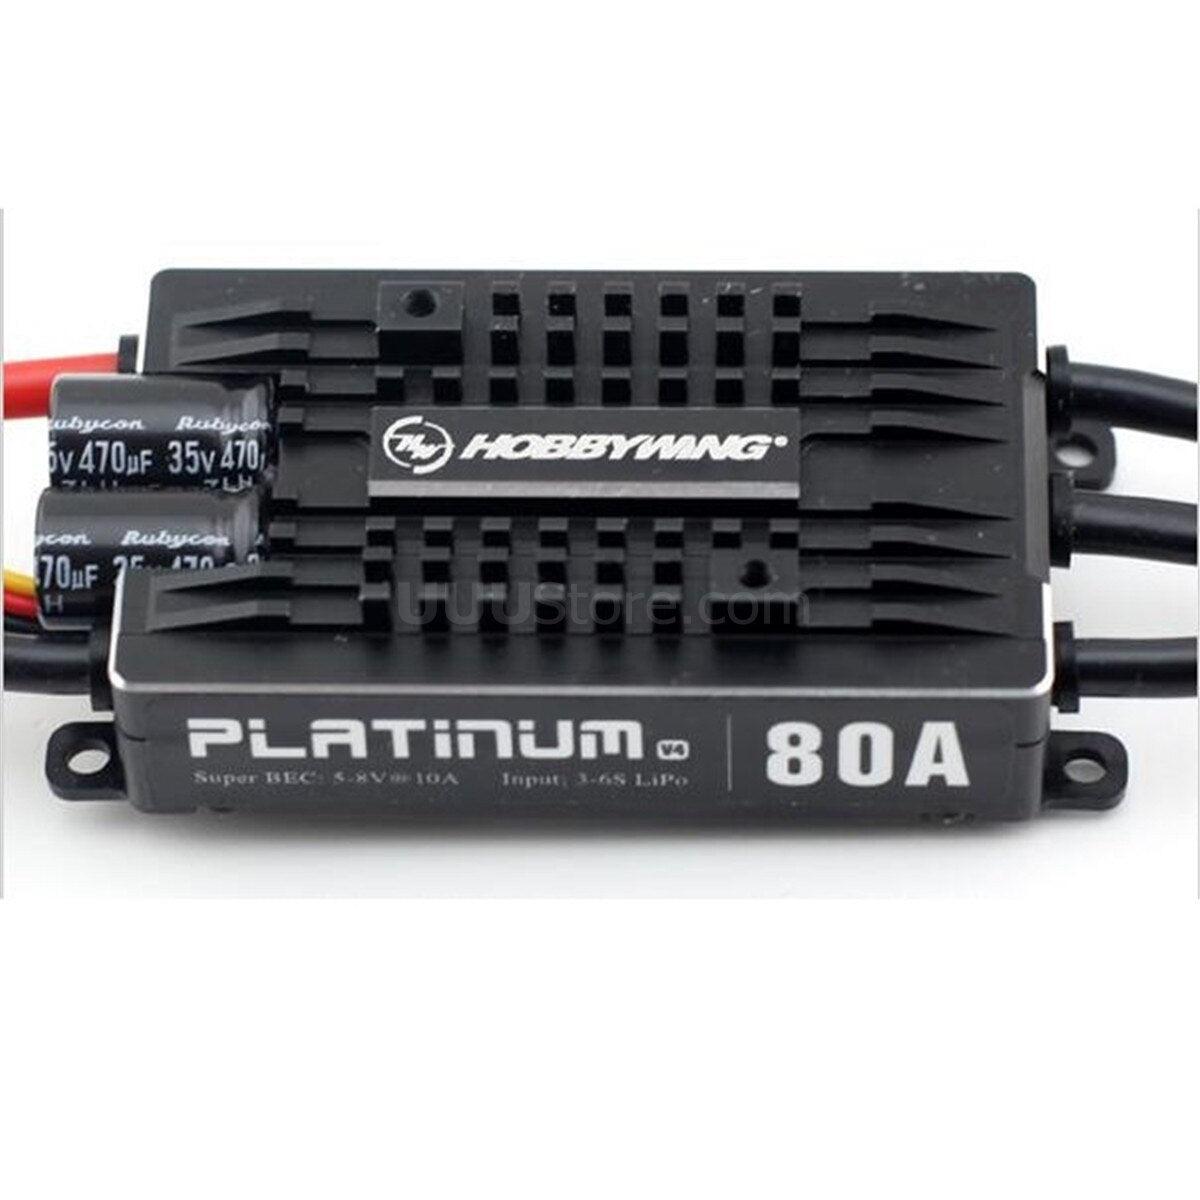 HobbyWing Platinum 80A V4  ESC, High-performance ESC for 450-class helis and drones, supports 3S-6S batteries with adjustable voltage and current.